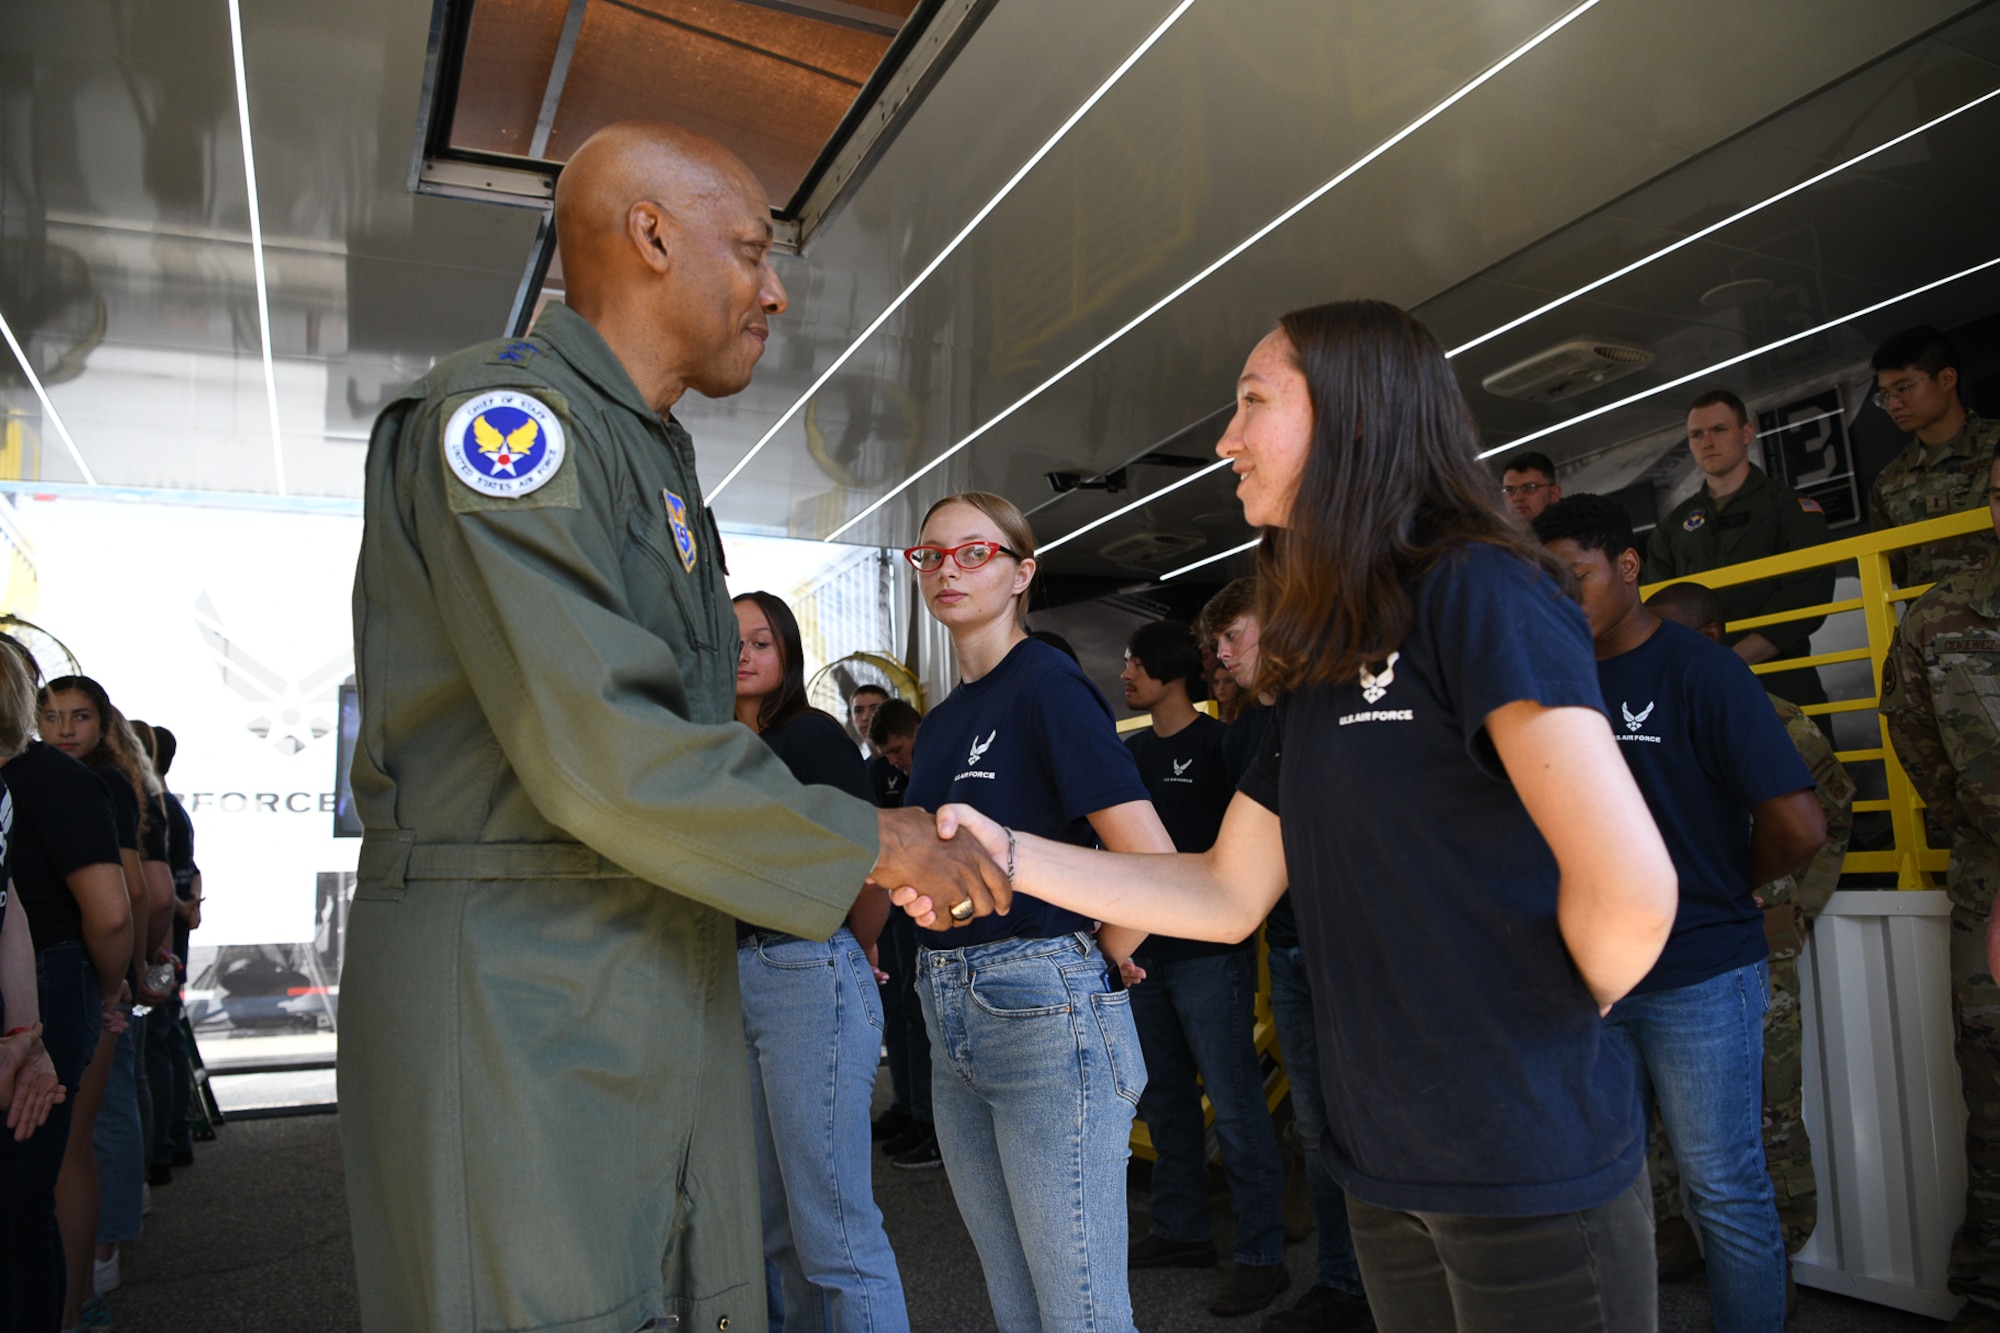 Air Force Chief of Staff Gen. CQ Brown, Jr. shakes hands with Caitlyn Ruttner, 17, from Mishicot, Wisconsin July 3, 2022 at Road America, near Elkhart Lake, Wisconsin, inside an Air Force national recruiting asset called “The Hangar.”